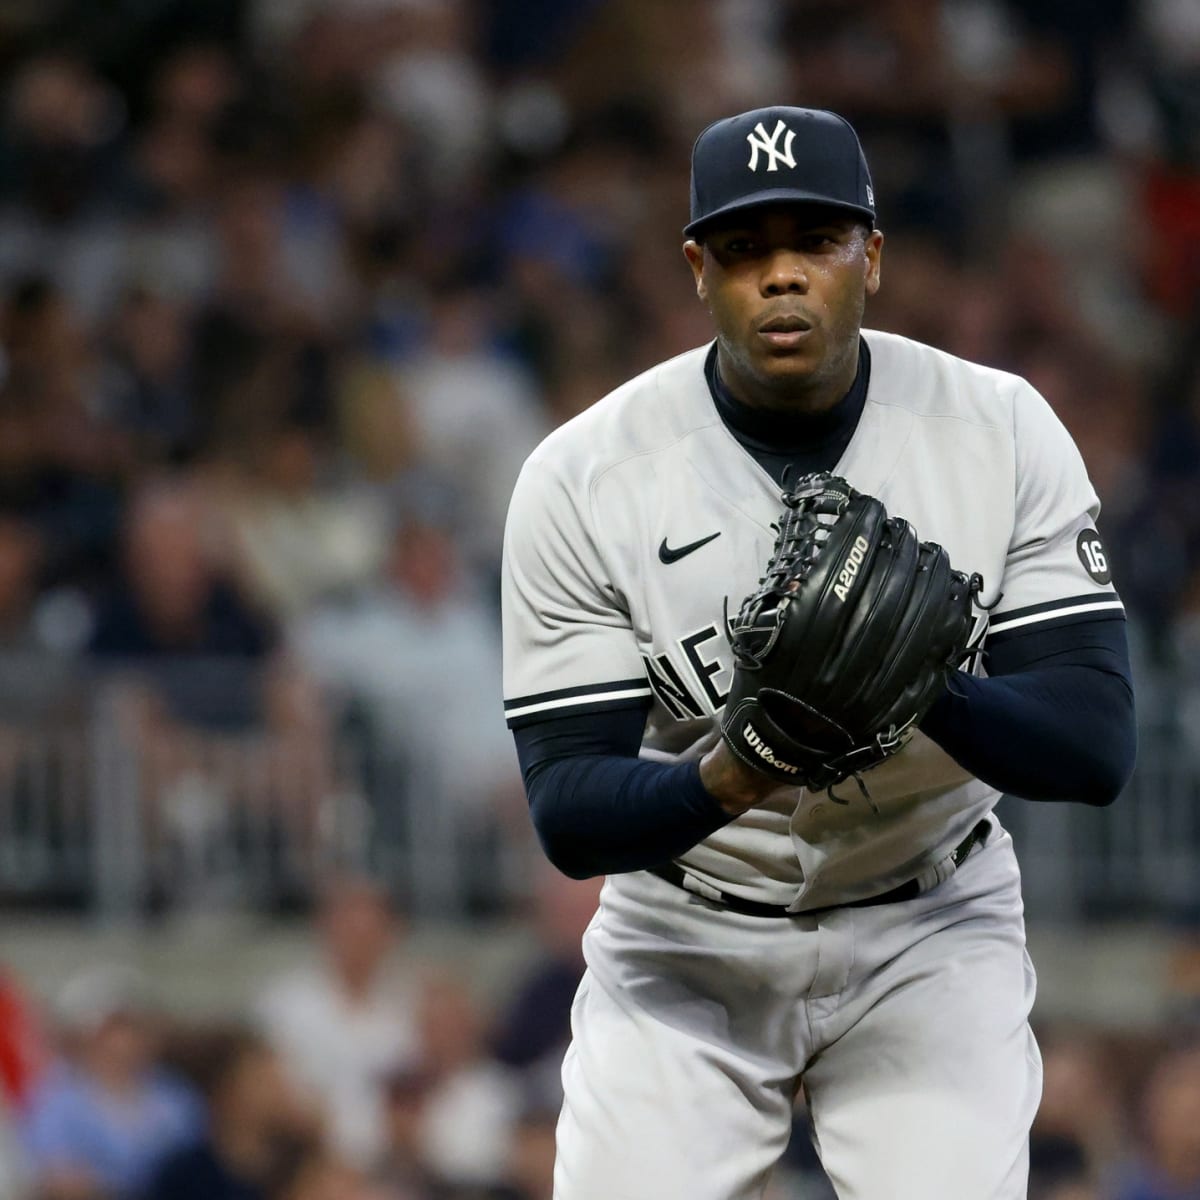 The Yankees need Aroldis Chapman to return to All-Star form in